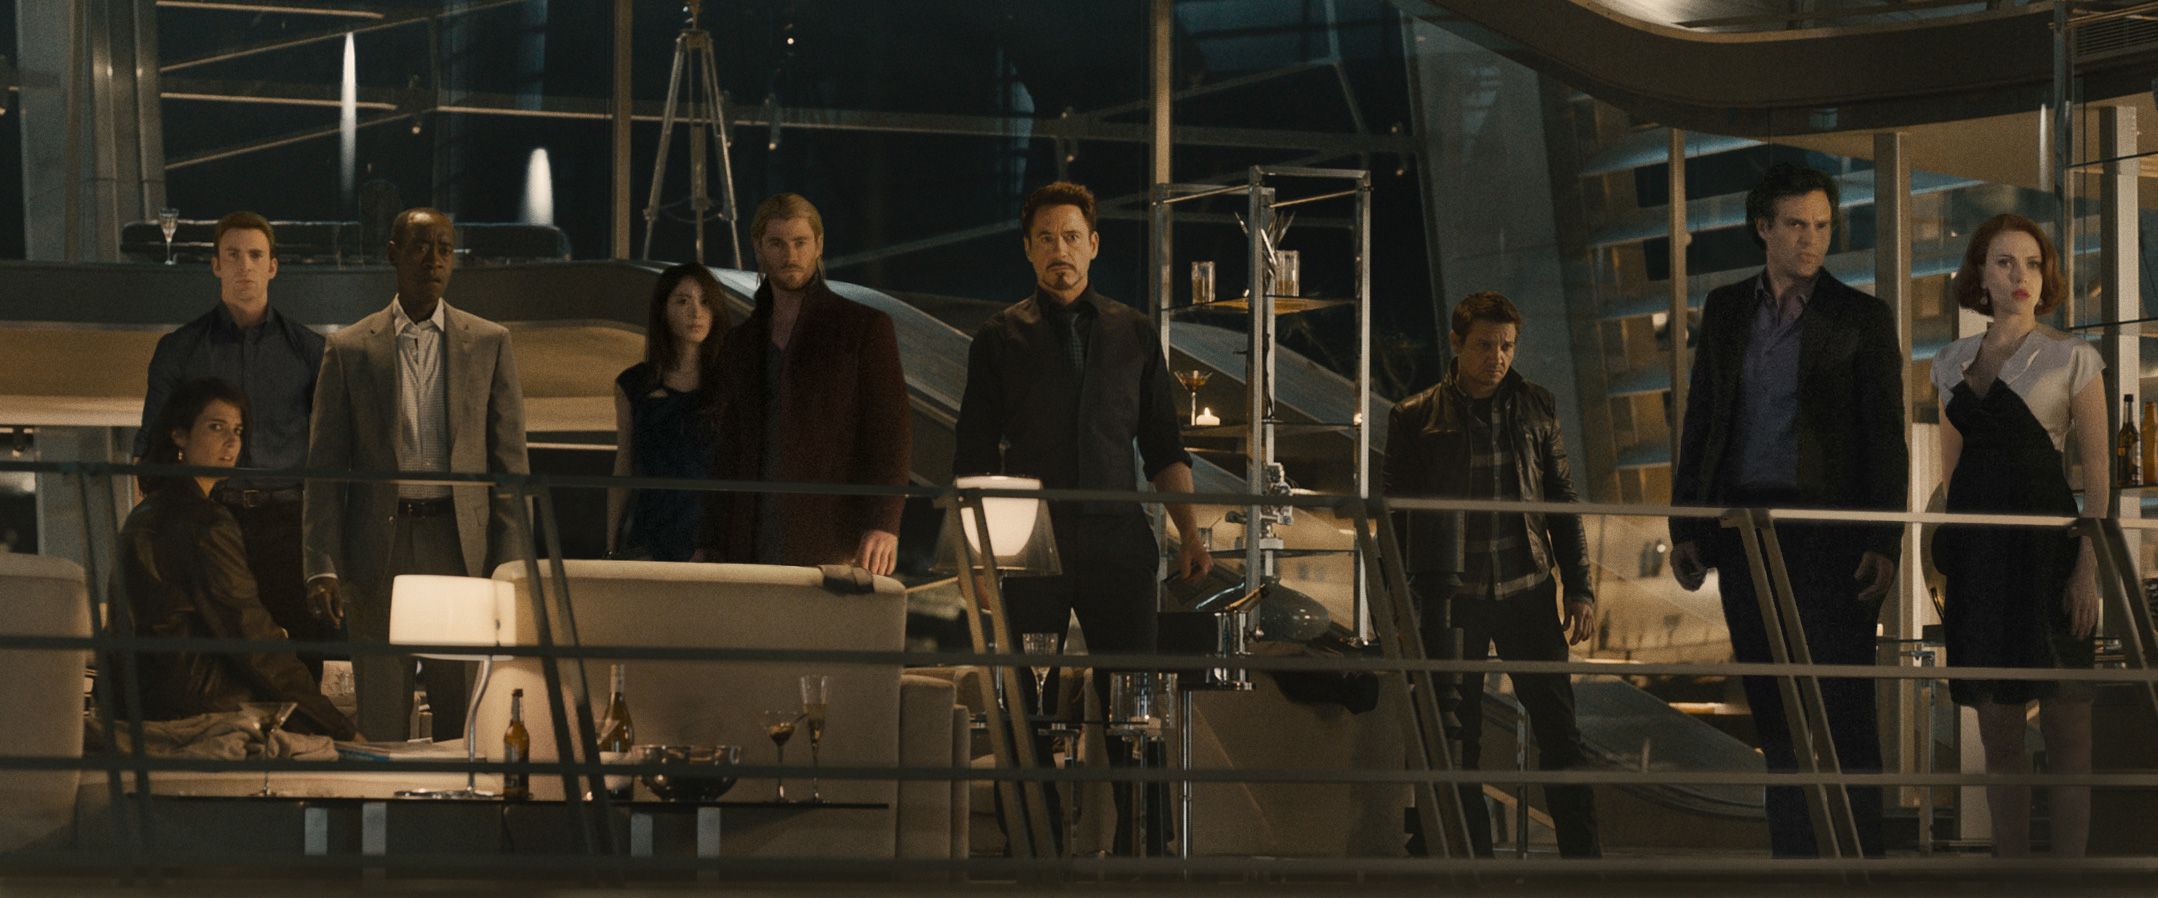 The Cast of the Avengers: Age of Ultron